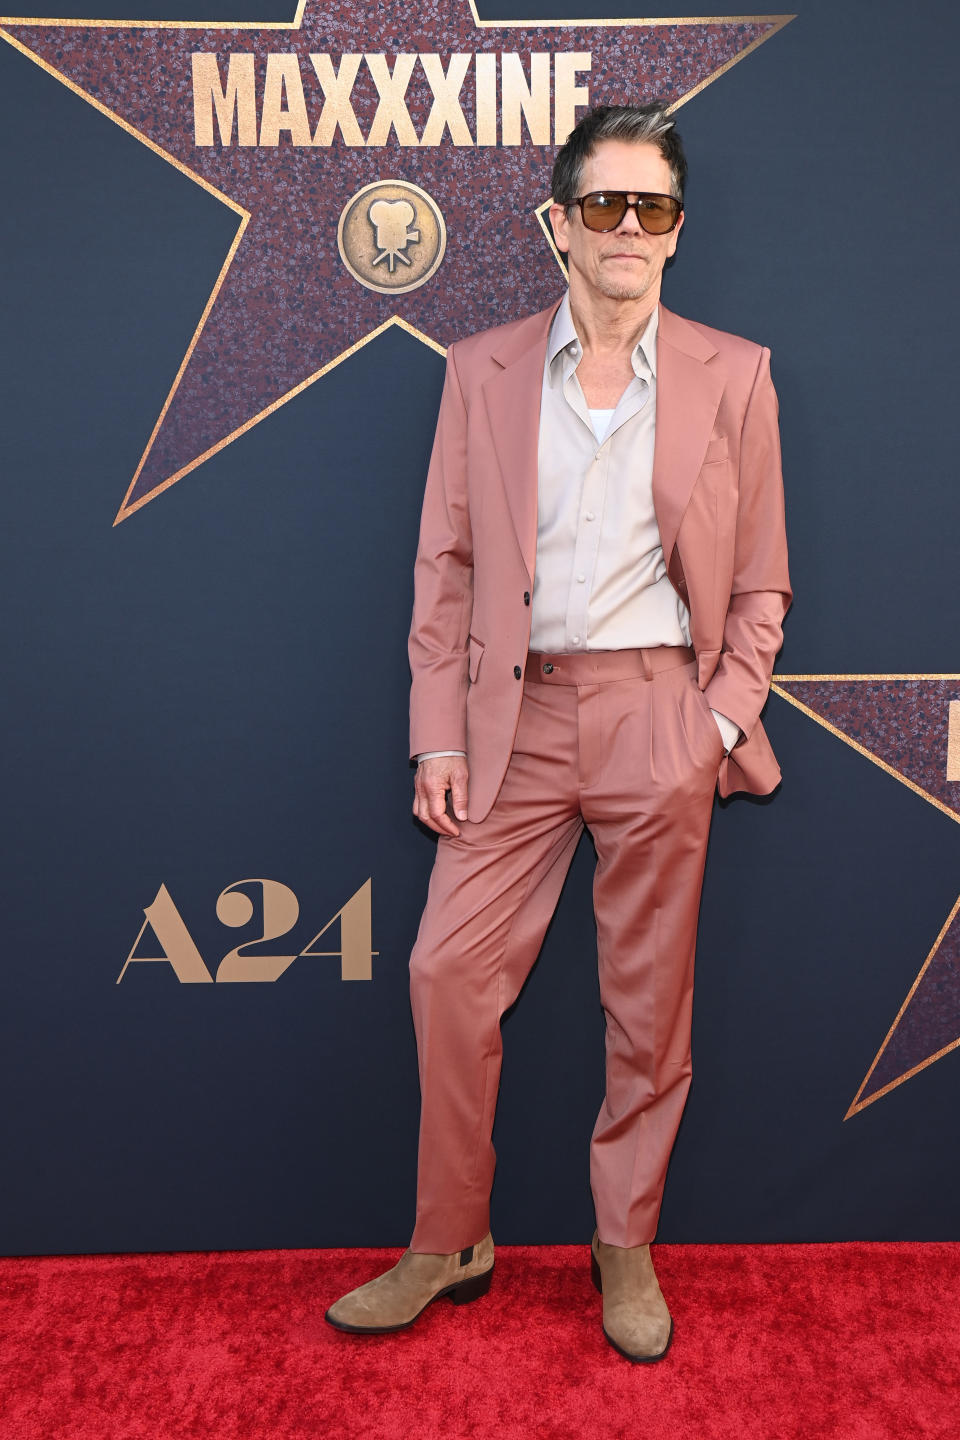 Kevin Bacon is wearing a stylish suit with sunglasses and suede shoes